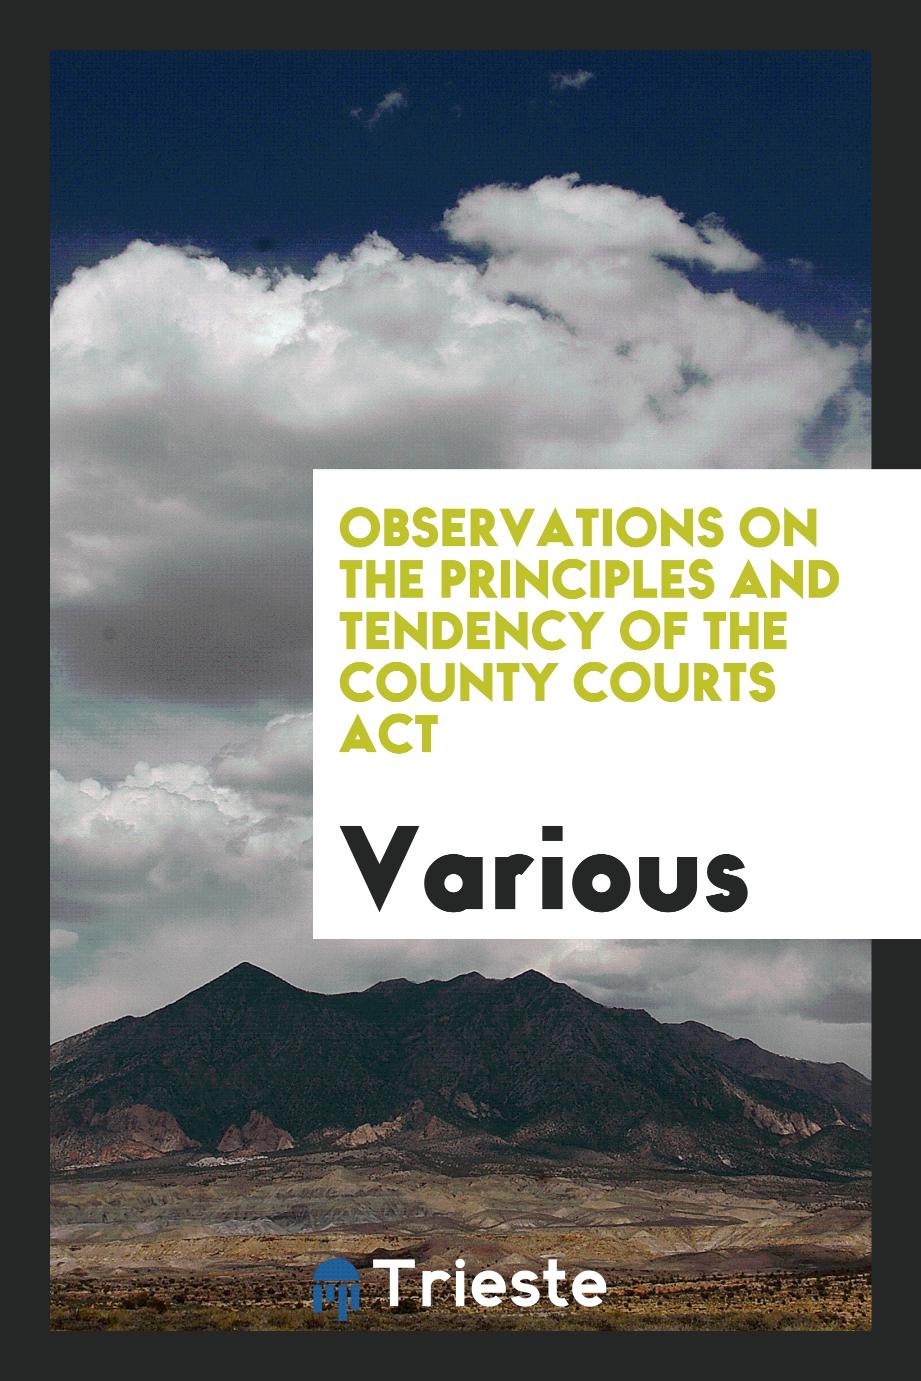 Observations on the Principles and Tendency of the County Courts Act